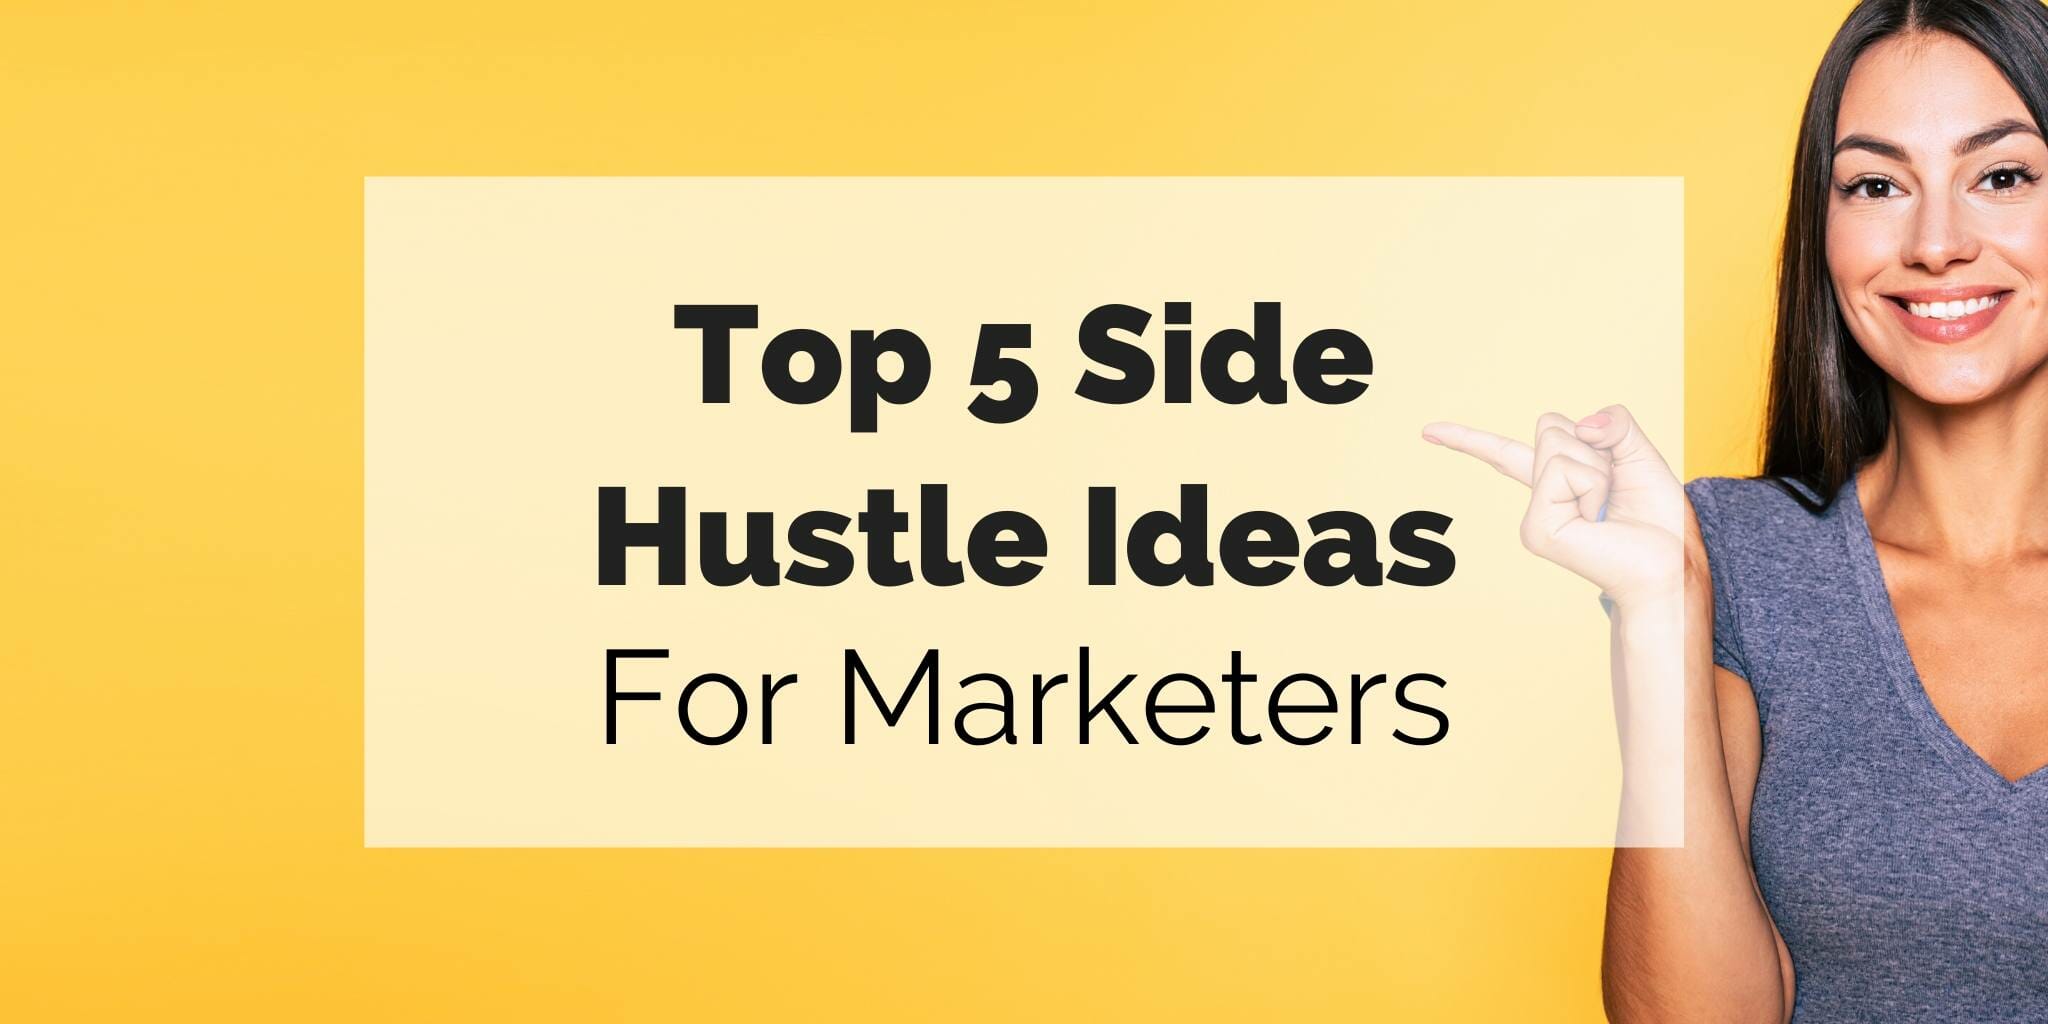 top 5 side hustle ideas for marketers